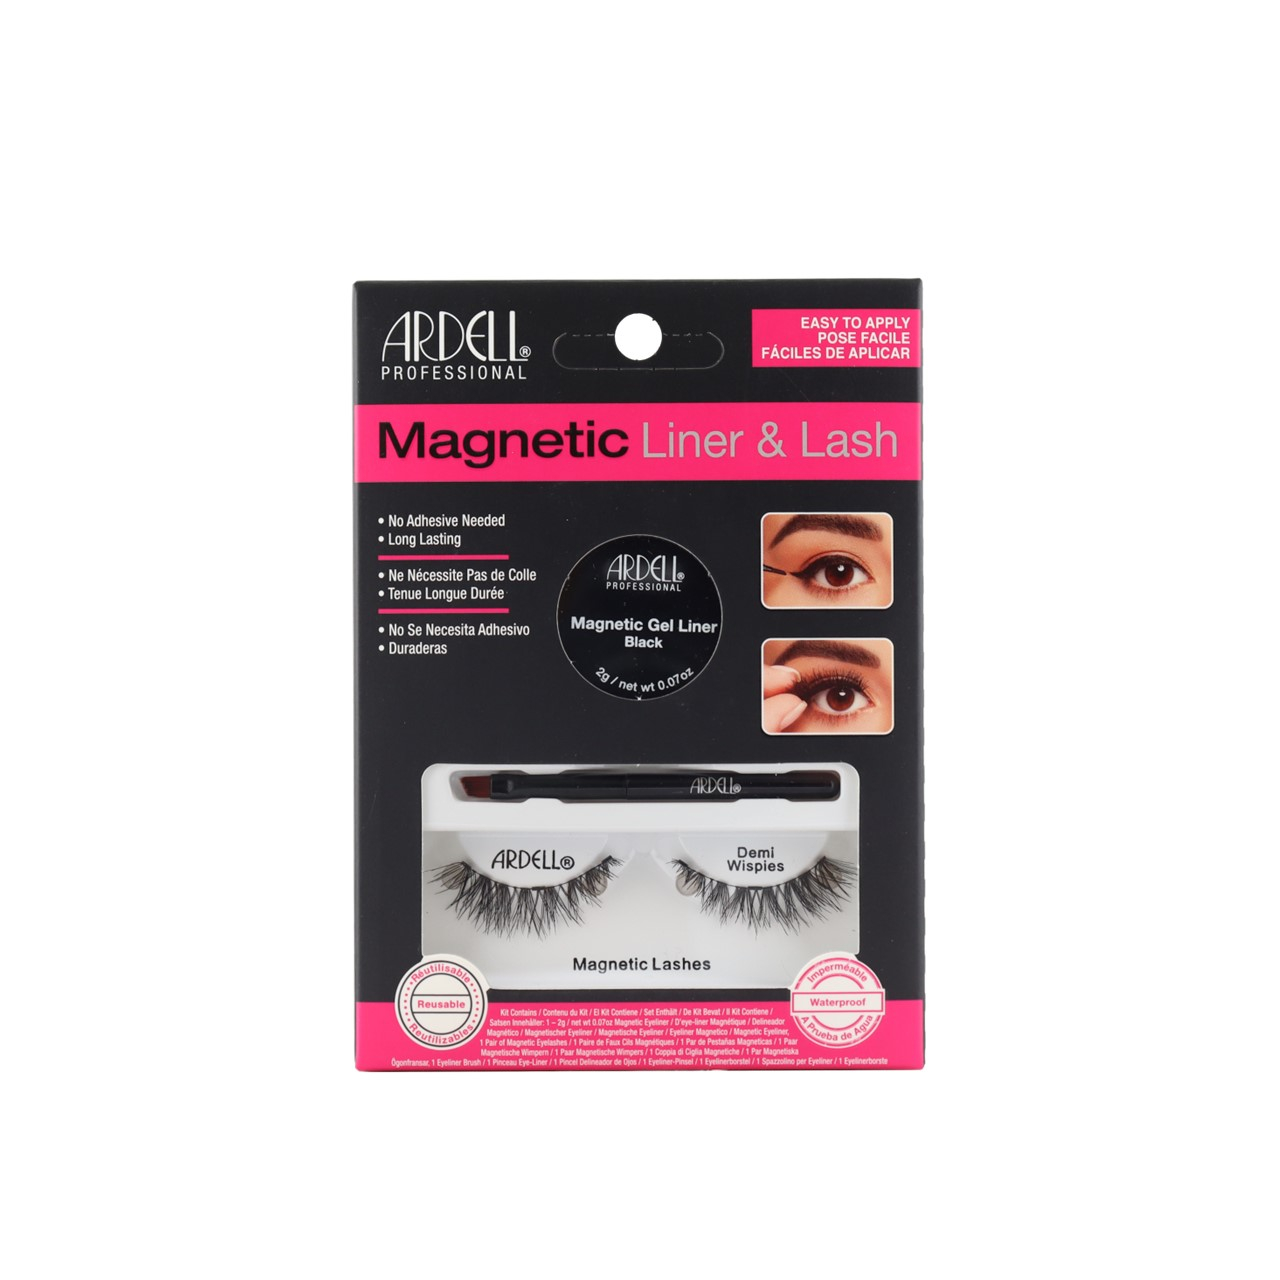 Ardell Magnetic Liner & Lash Demi Wispies Kit